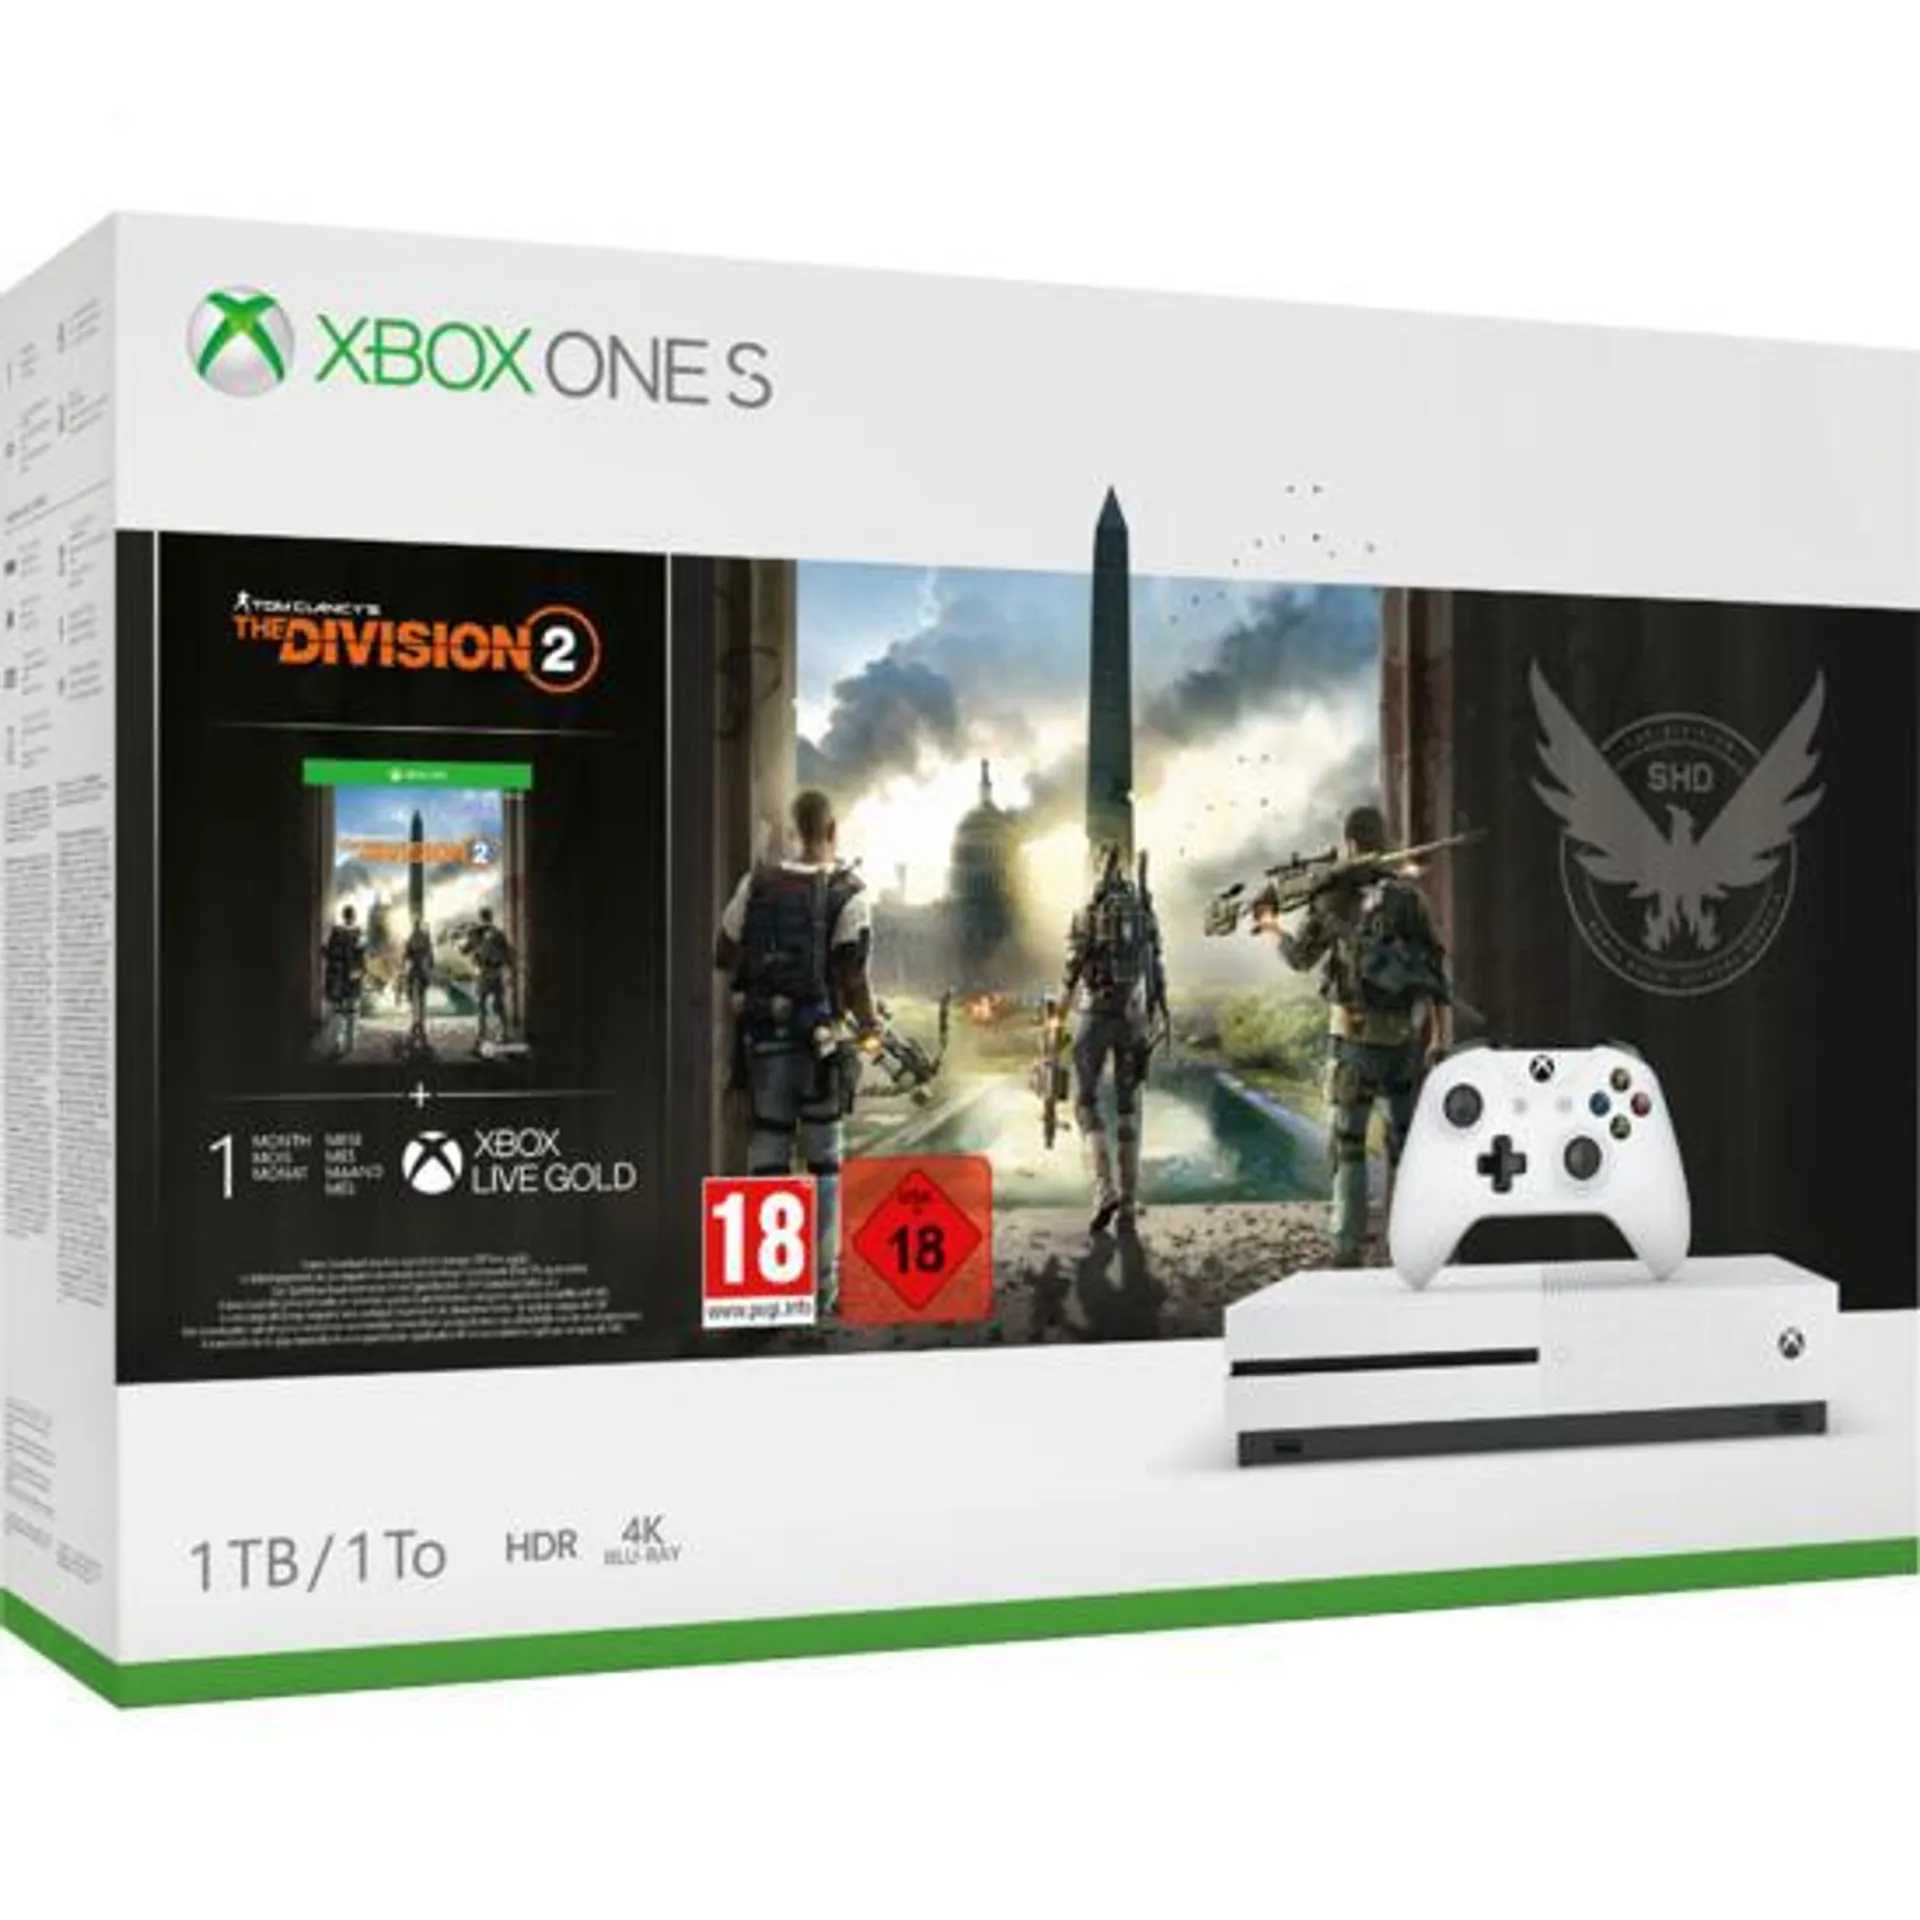 Xbox One S Konsole 1TB inkl. Tom Clancy's: The Division 2